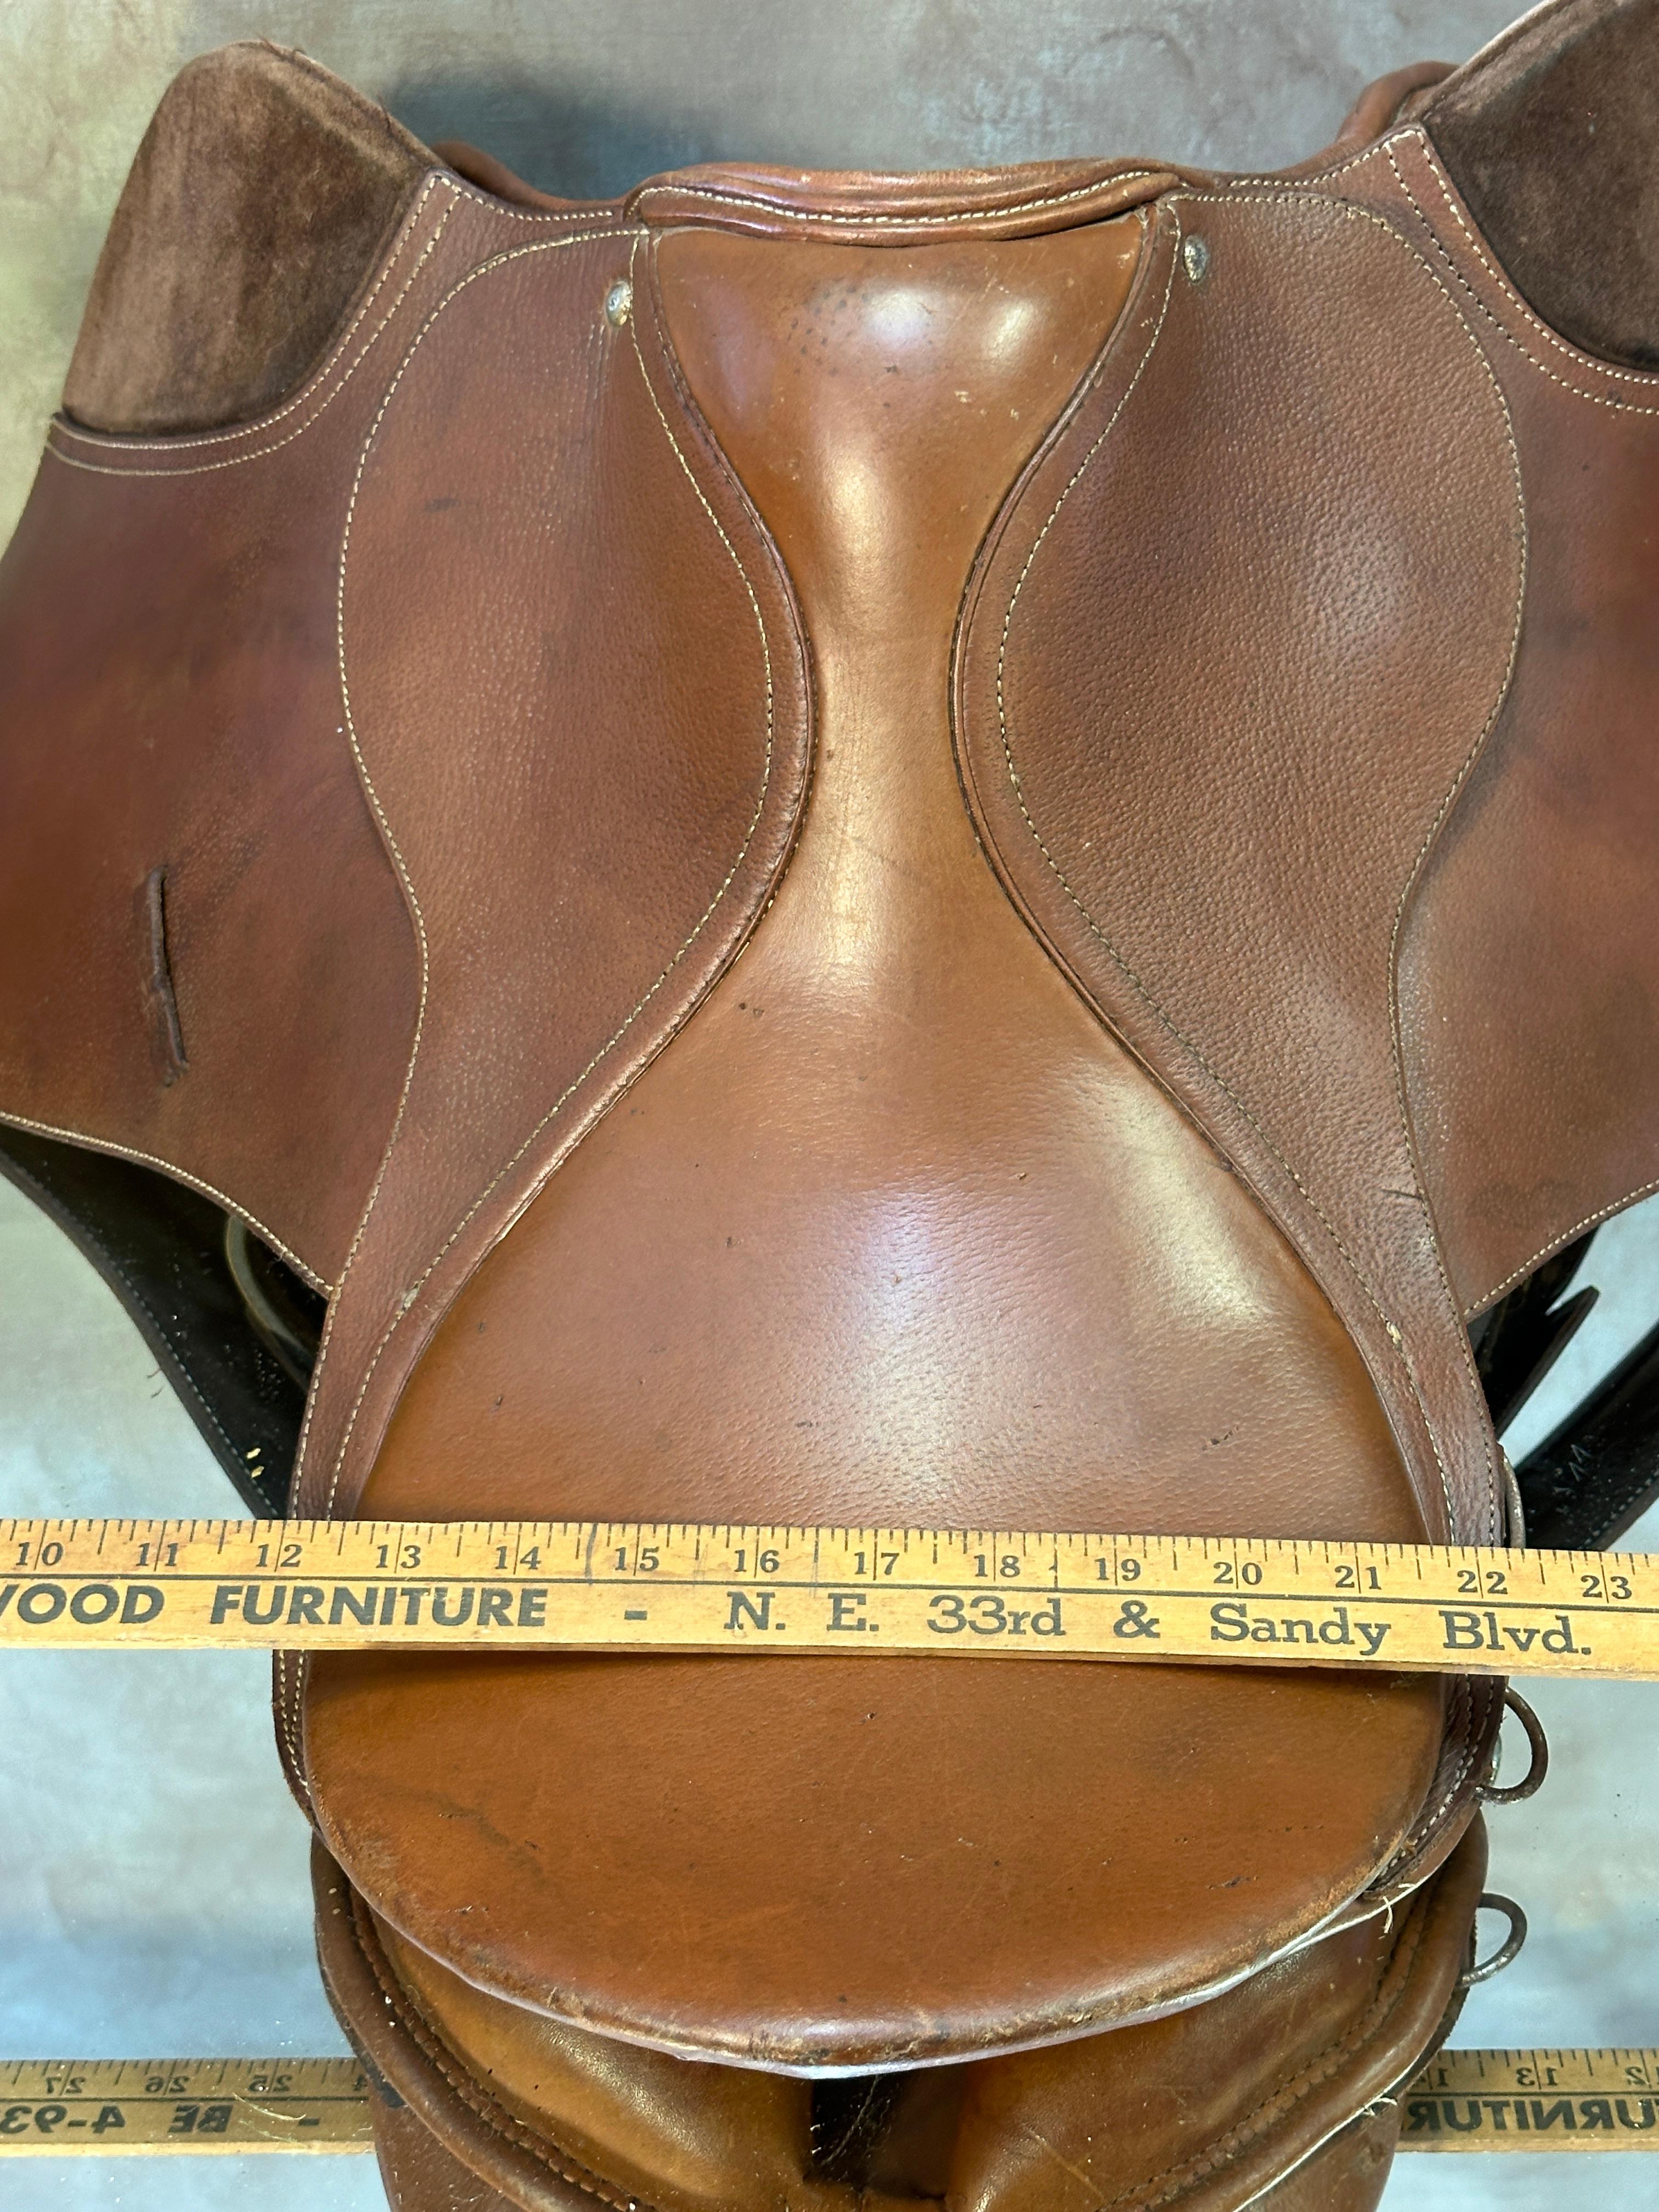 Rossi Y Caruso Leather Horse Saddle